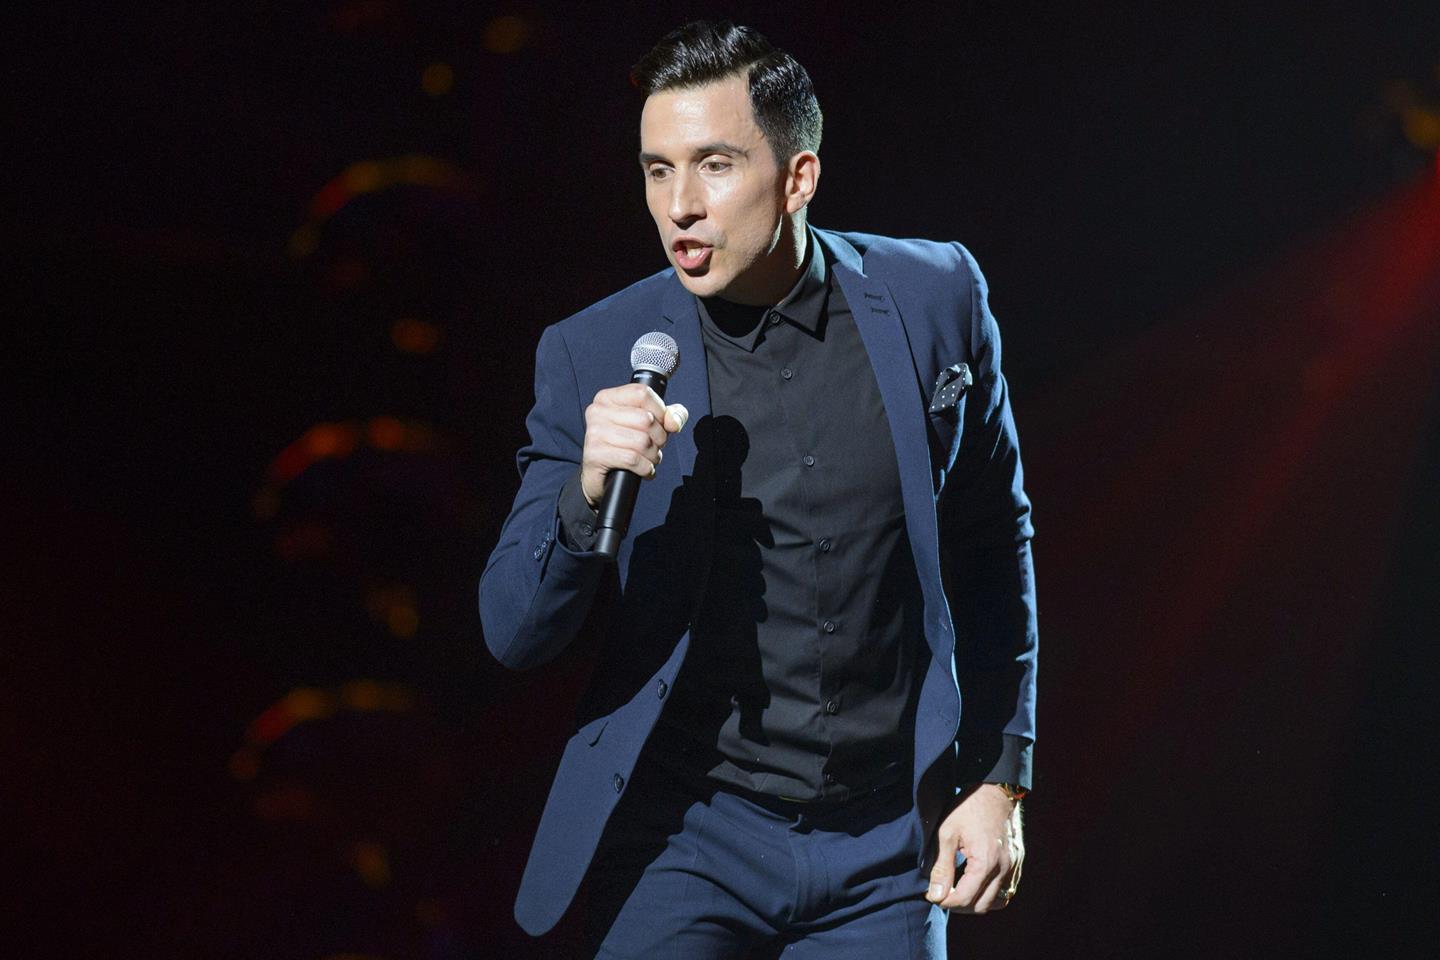 russell kane tour 2021